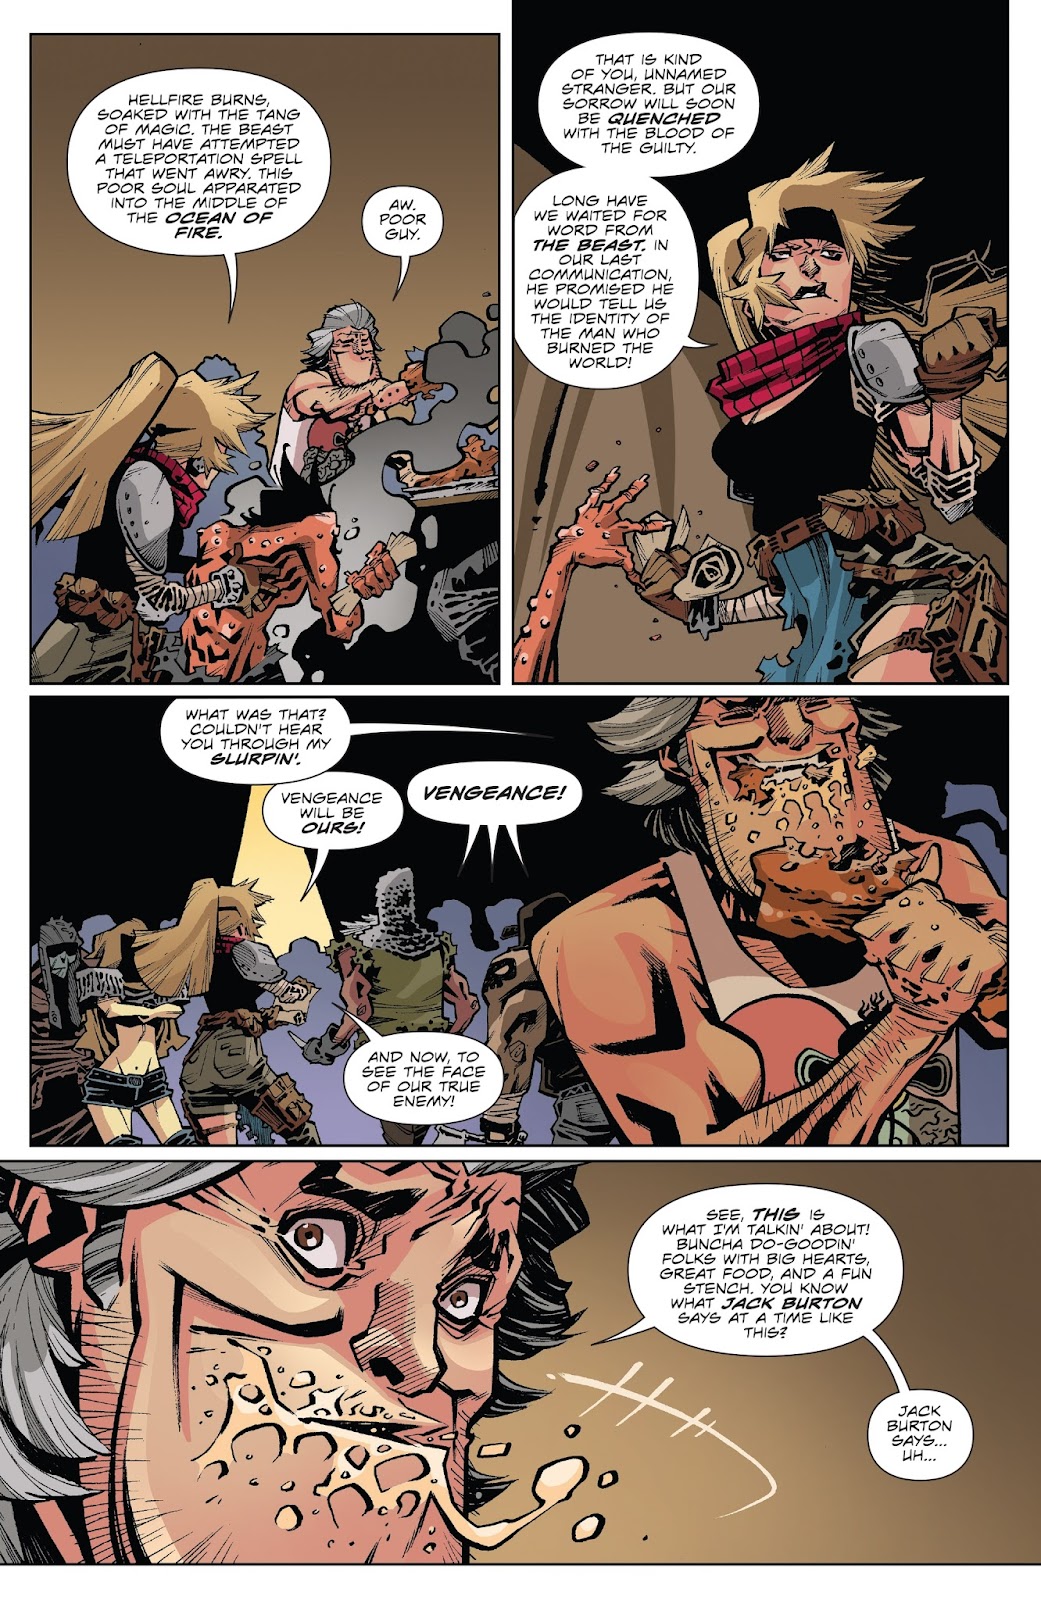 Big Trouble in Little China: Old Man Jack issue 2 - Page 15